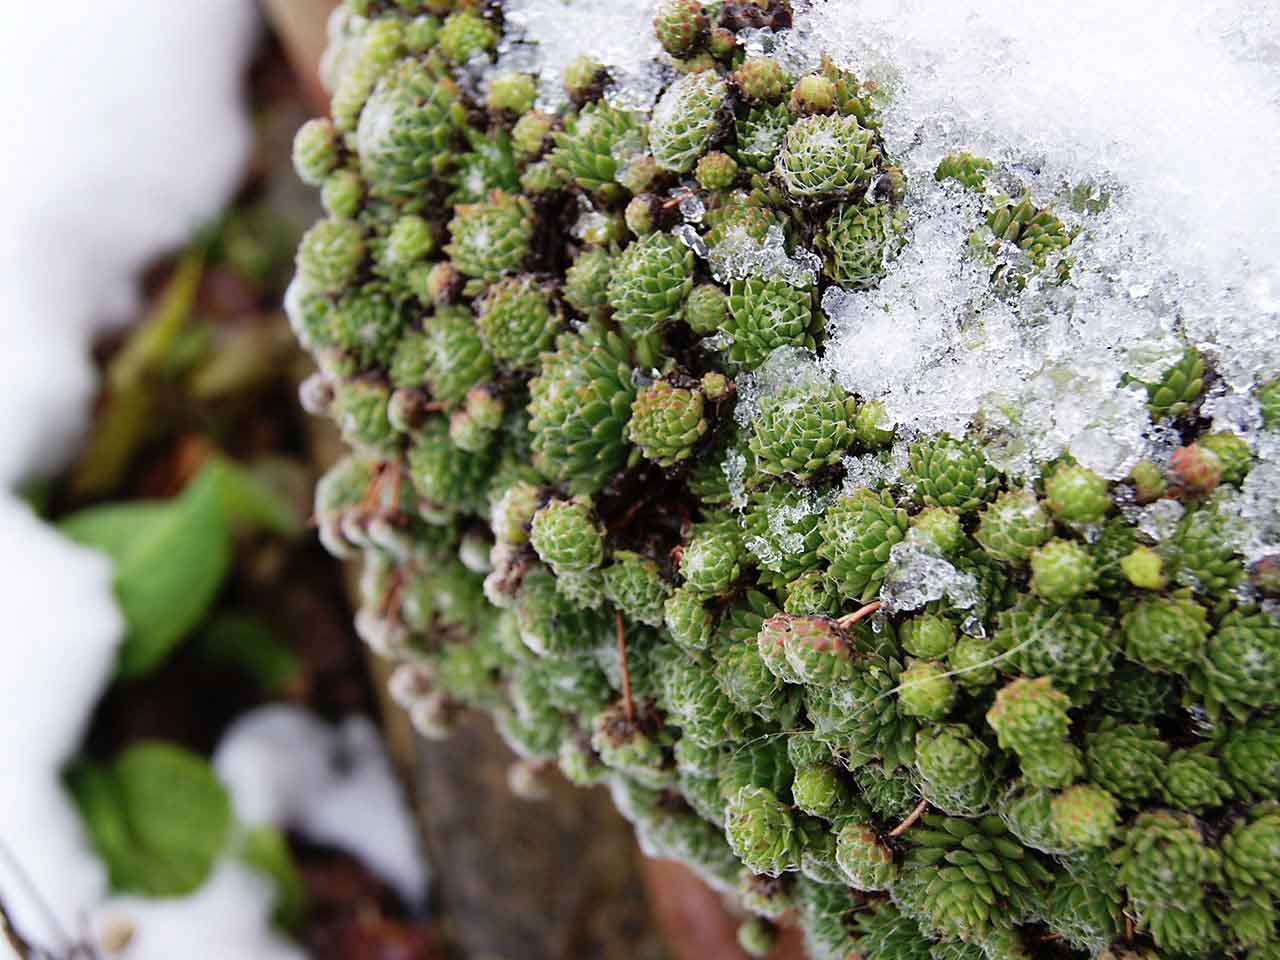 Pot plant ouside in winter covered in ice and snow